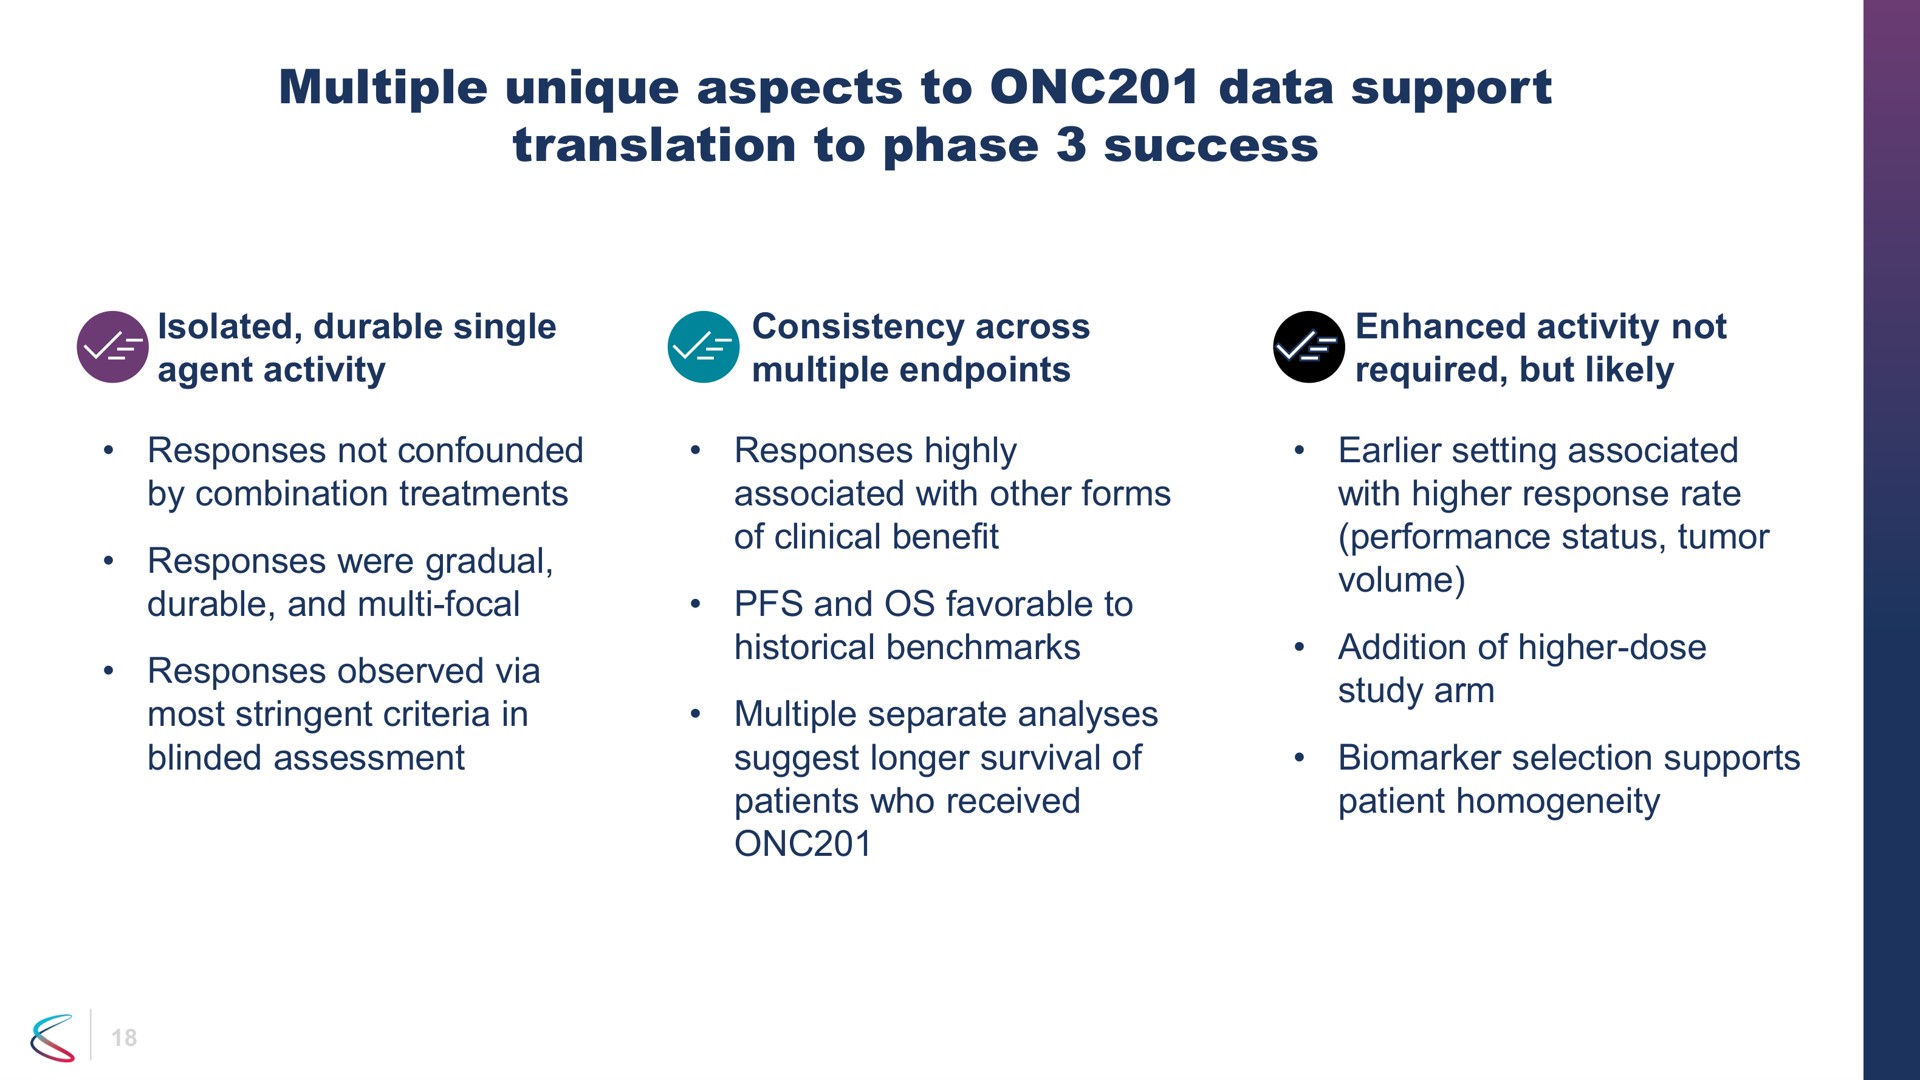 multiple unique aspects to data support translation to phase success | Chimerix